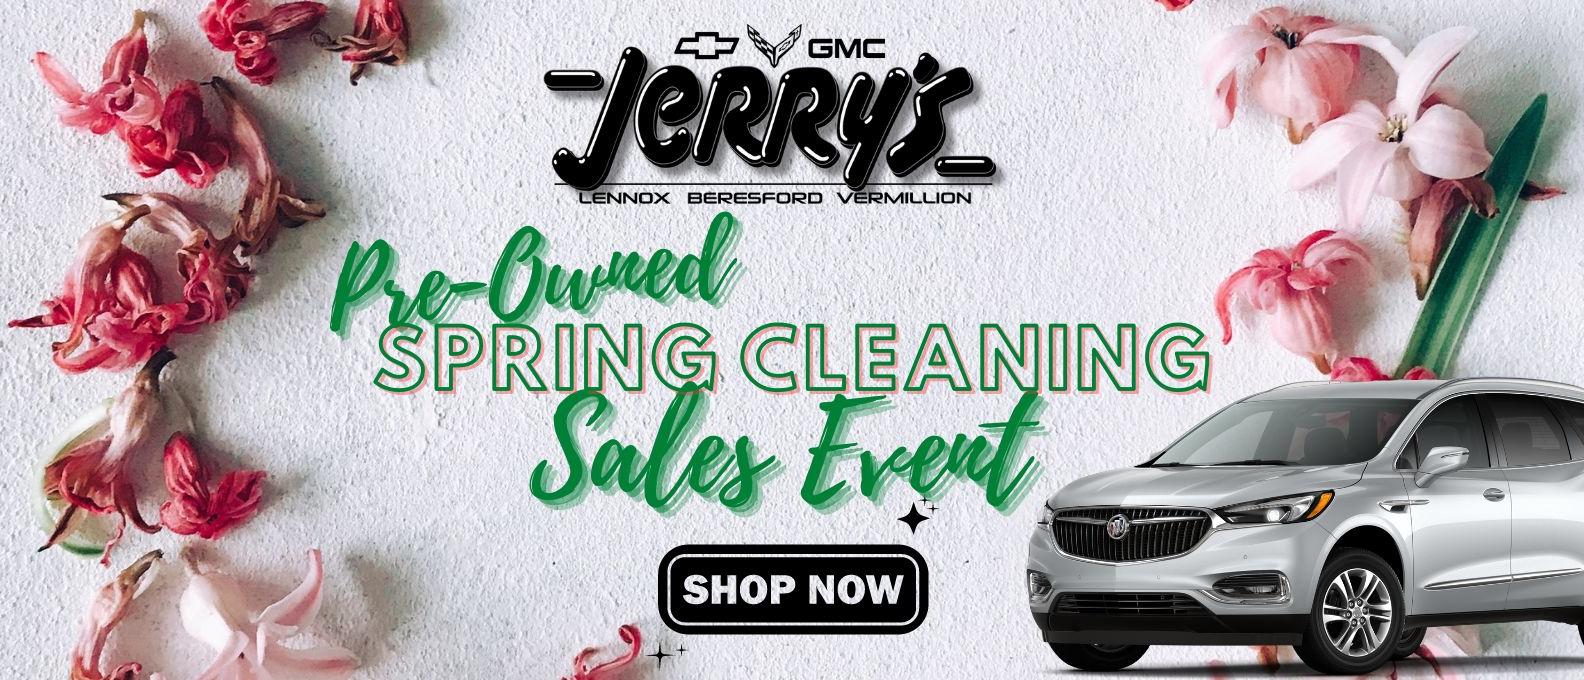 Pre-Owned Sale at Jerry's